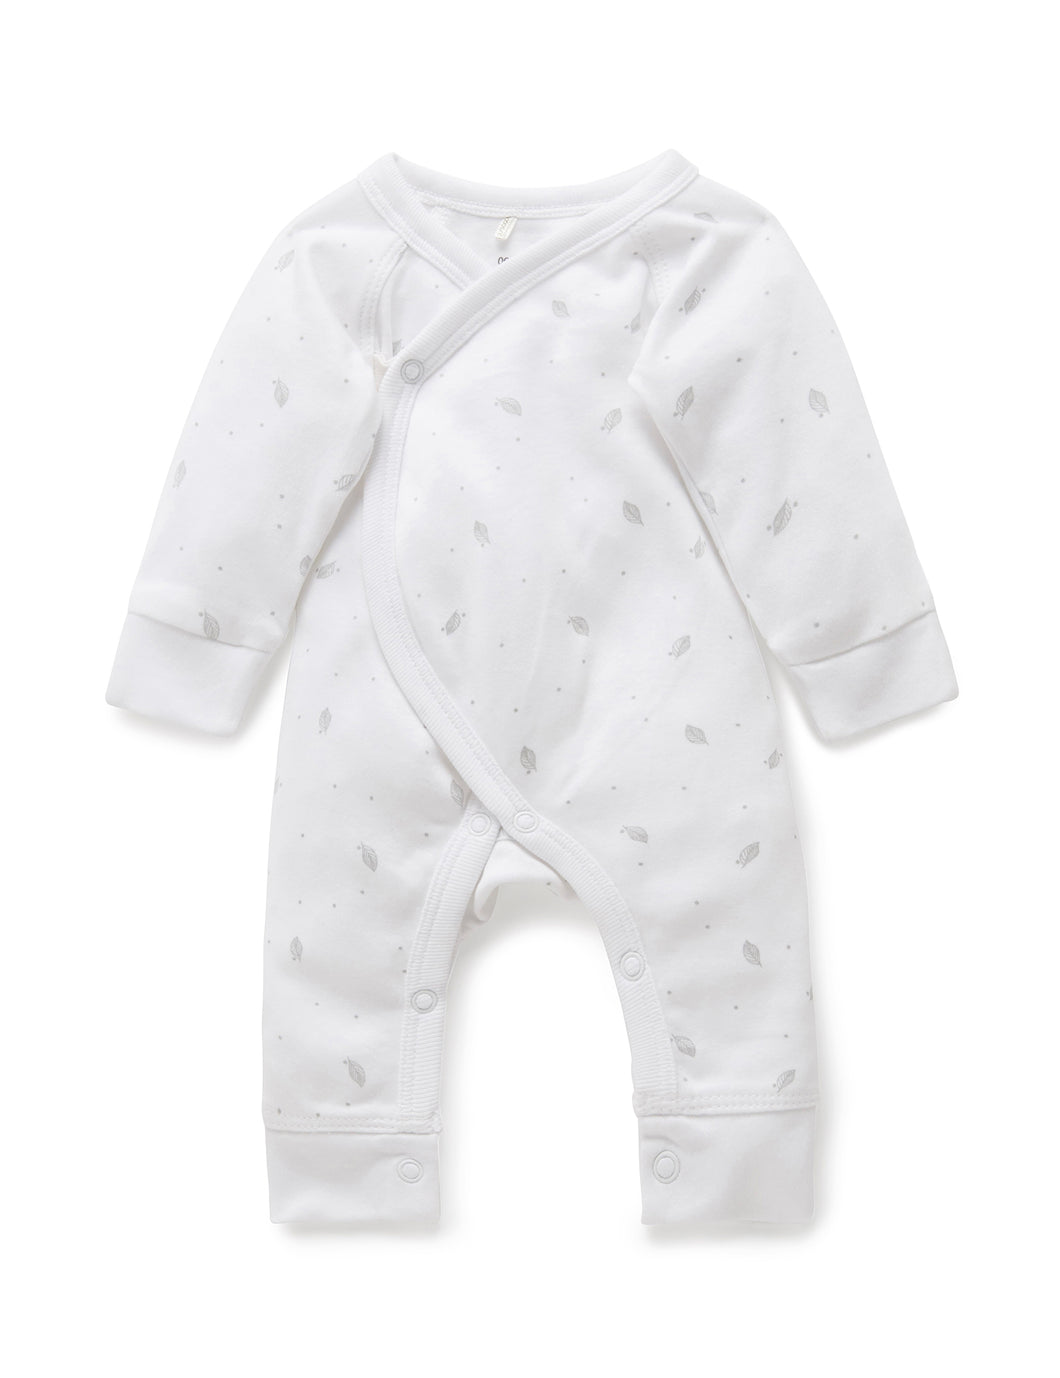 Pure Baby Premmie Crossover Growsuit Premature Baby Clothing